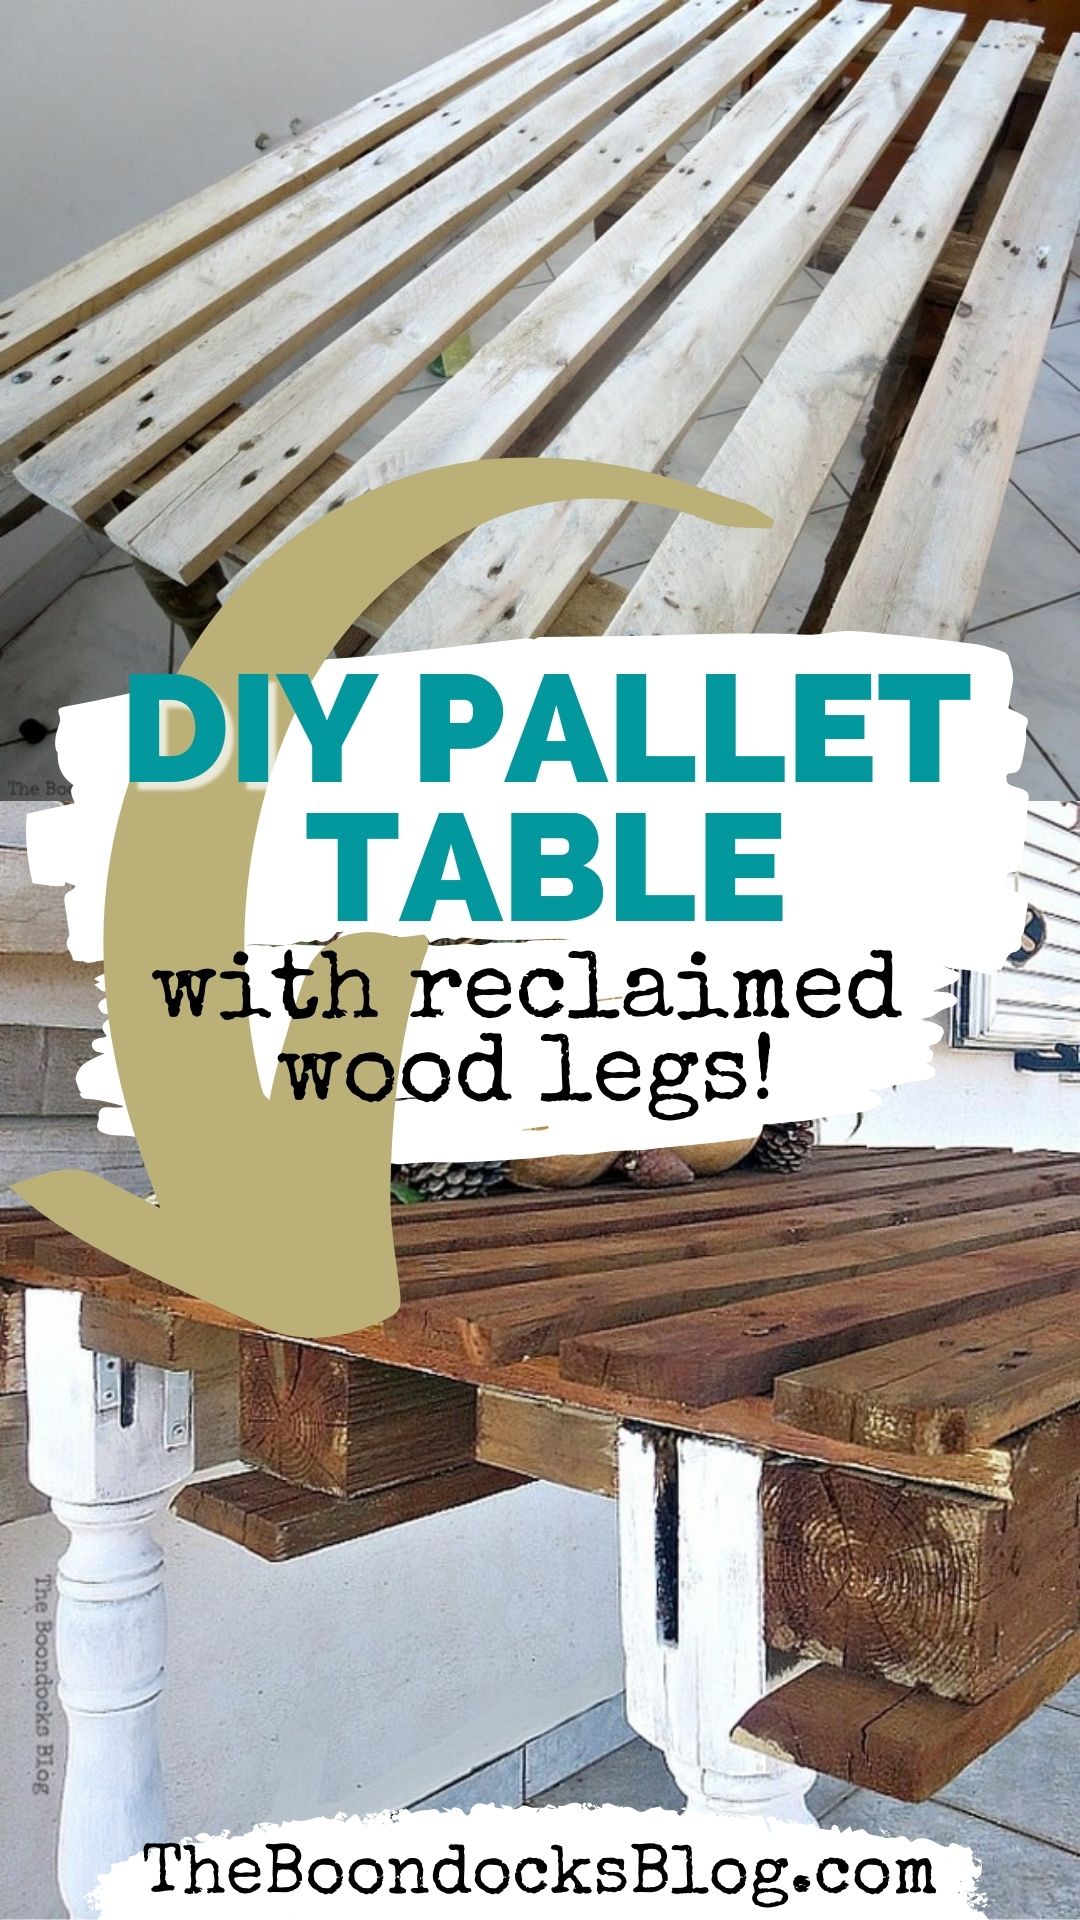 Collage of before and after images of a DIY pallet table.